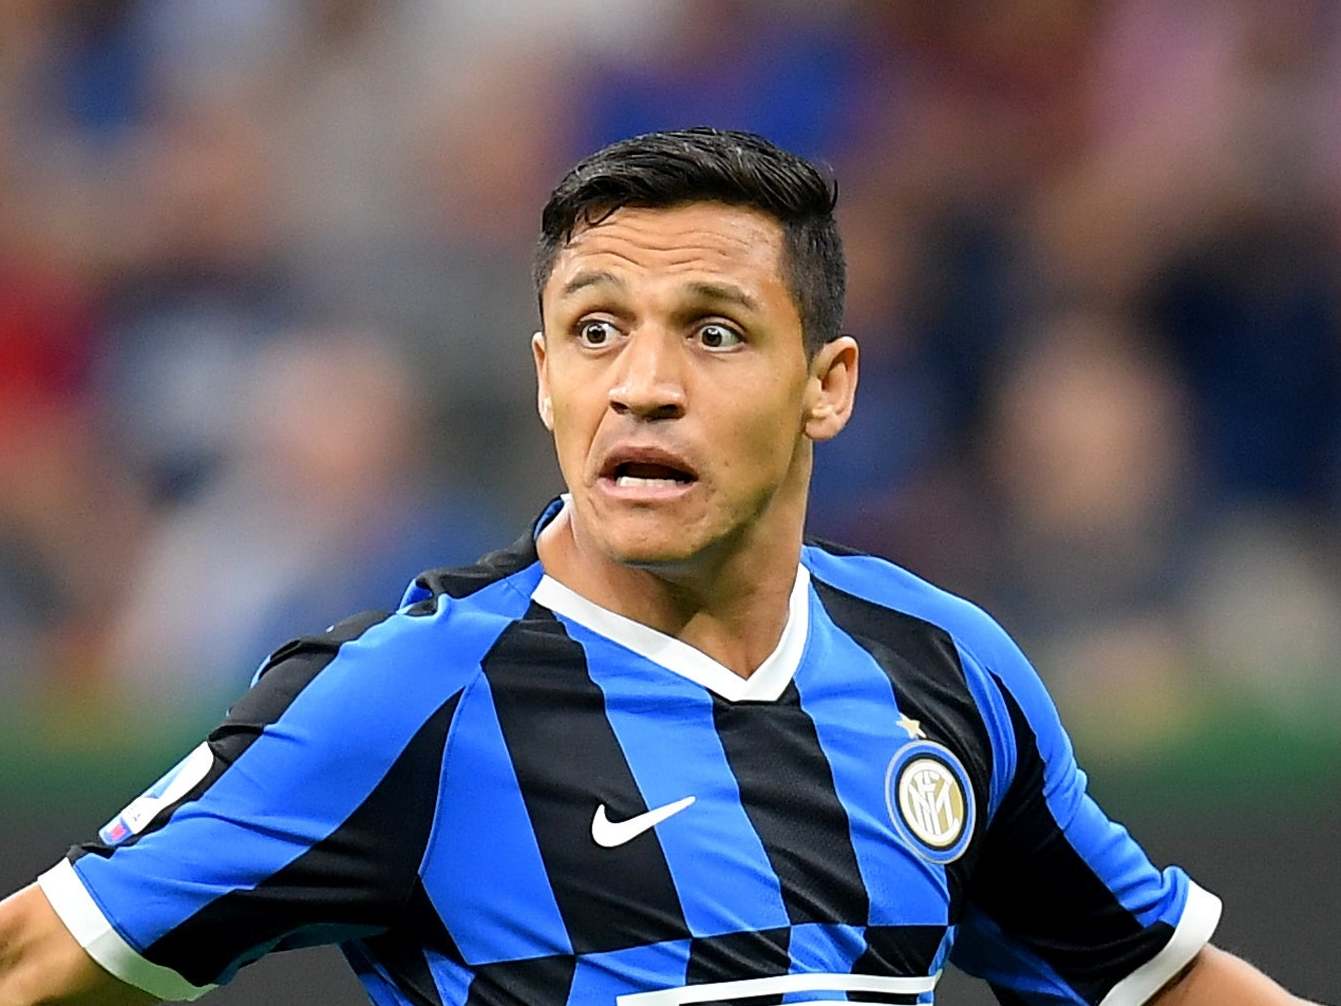 Conte claims Sanchez is still not ready to start for Inter